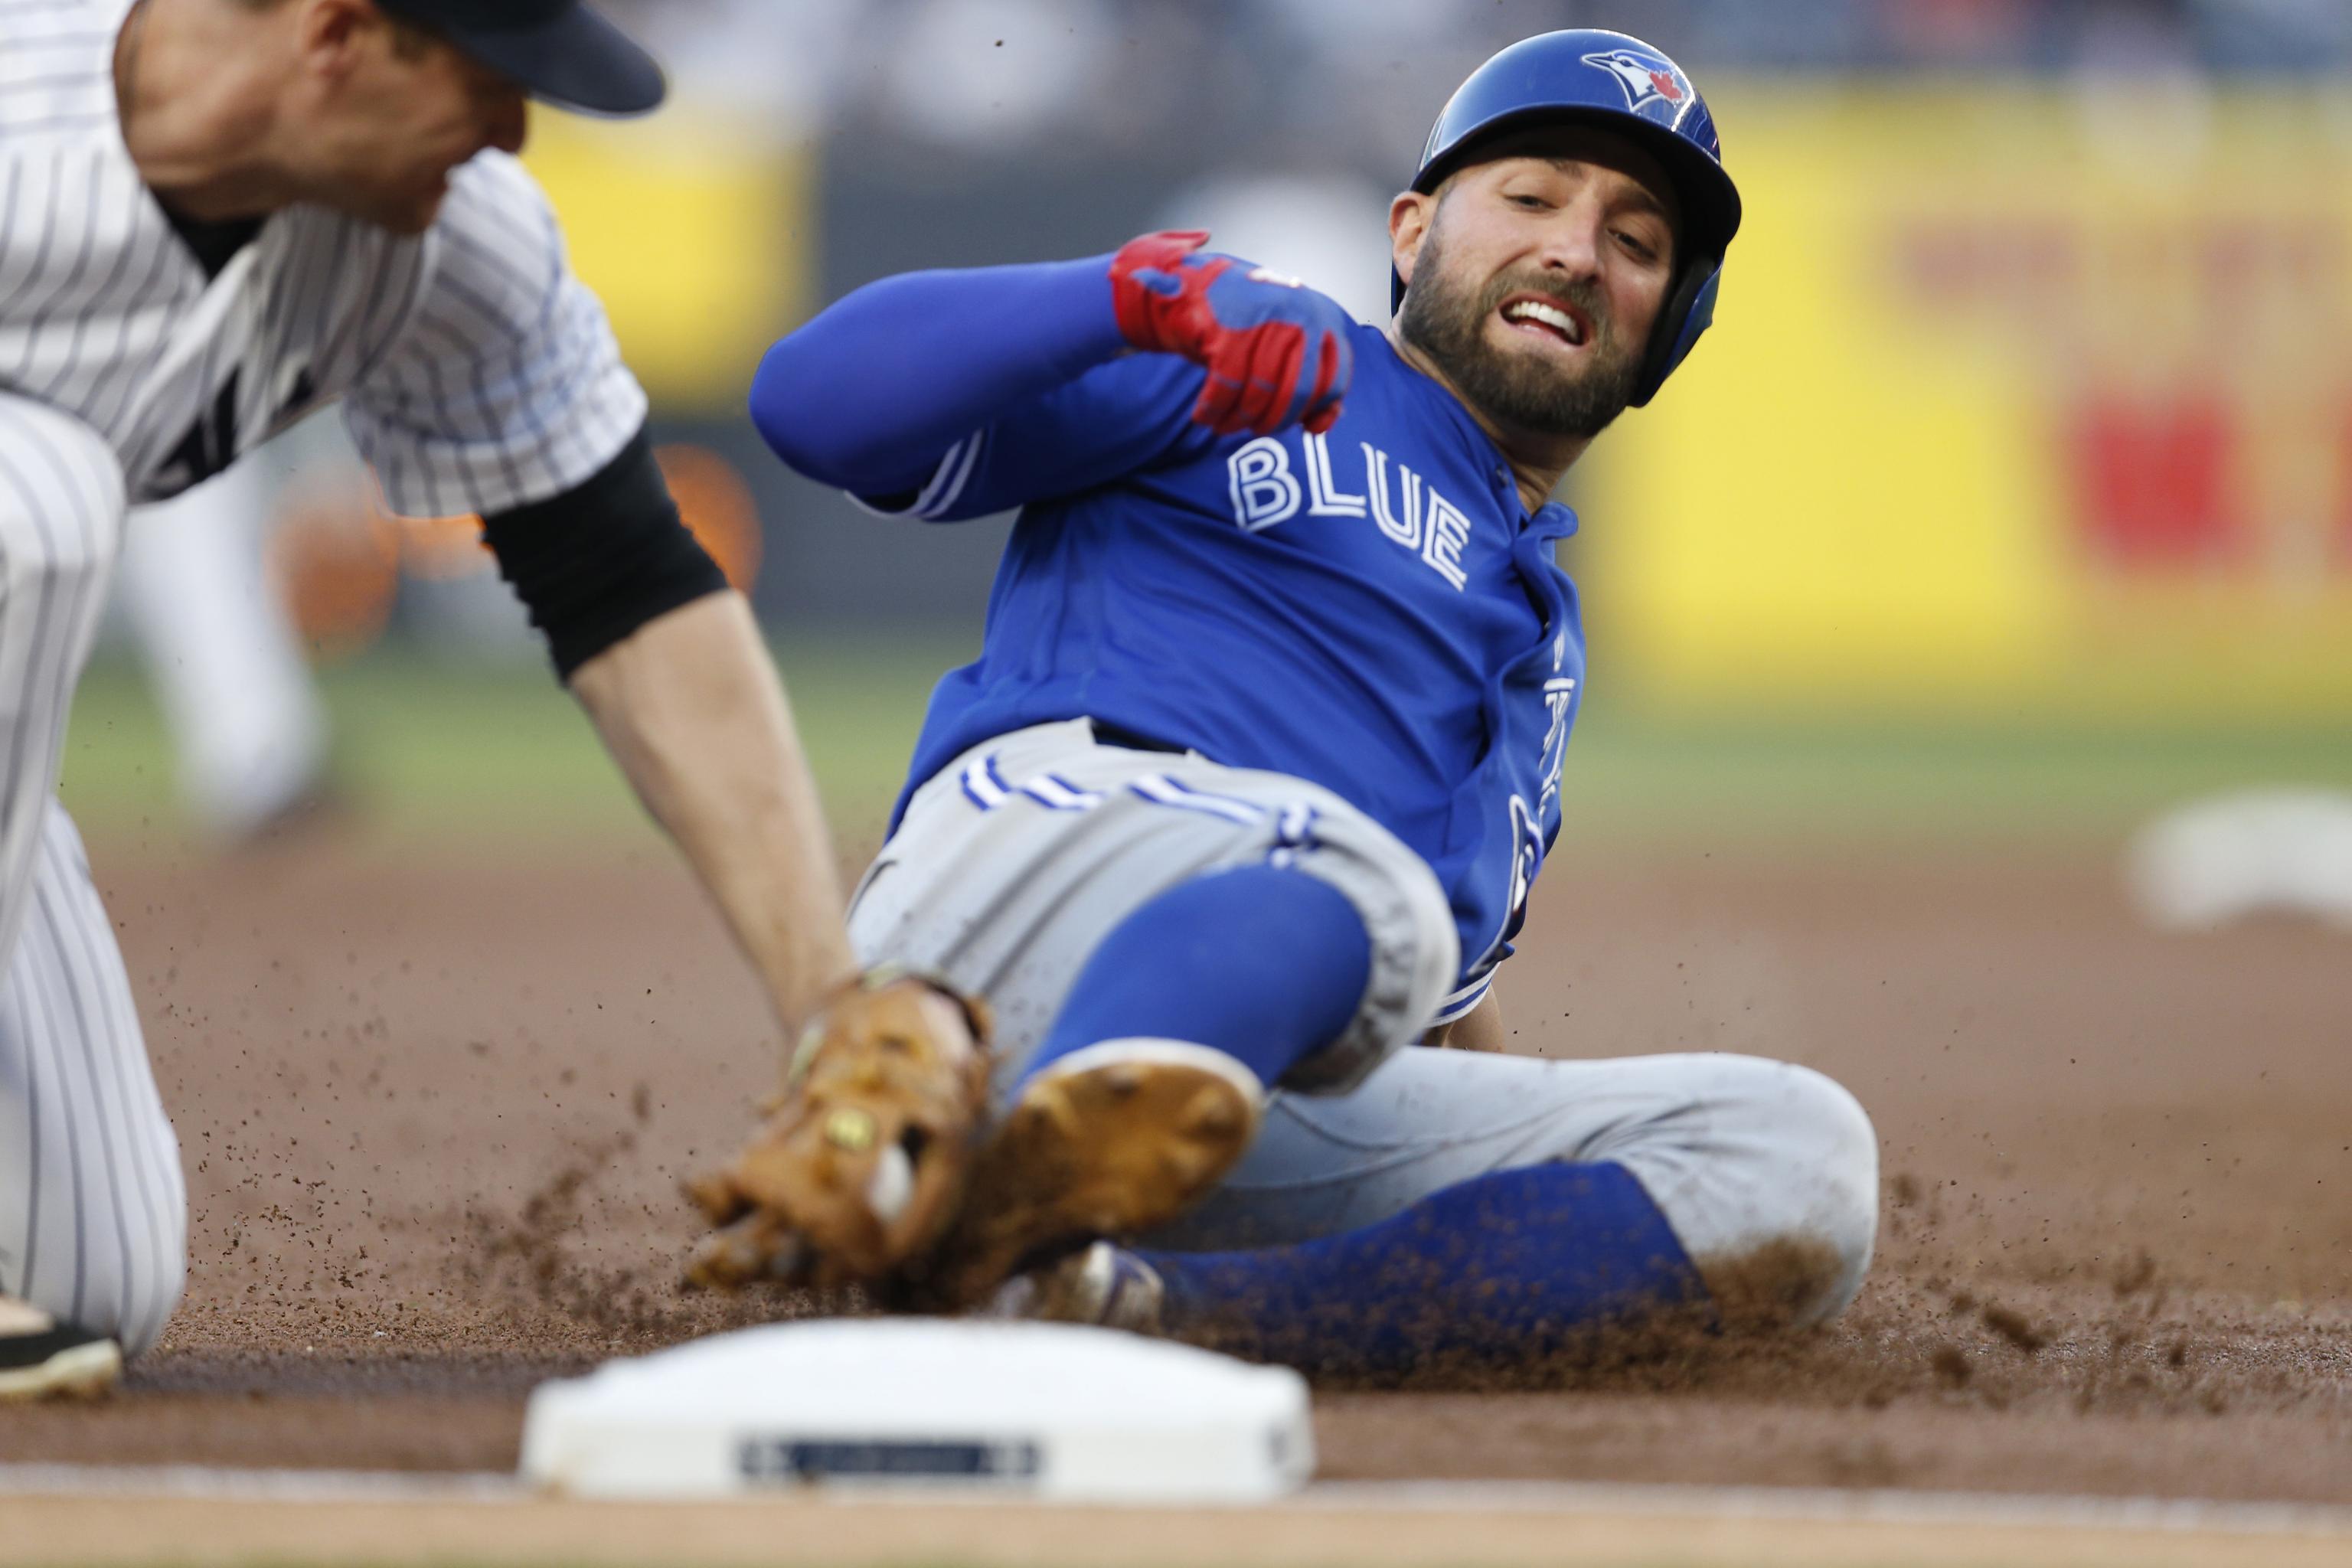 Mets' Kevin Pillar used to mask but not 'rude' taunts